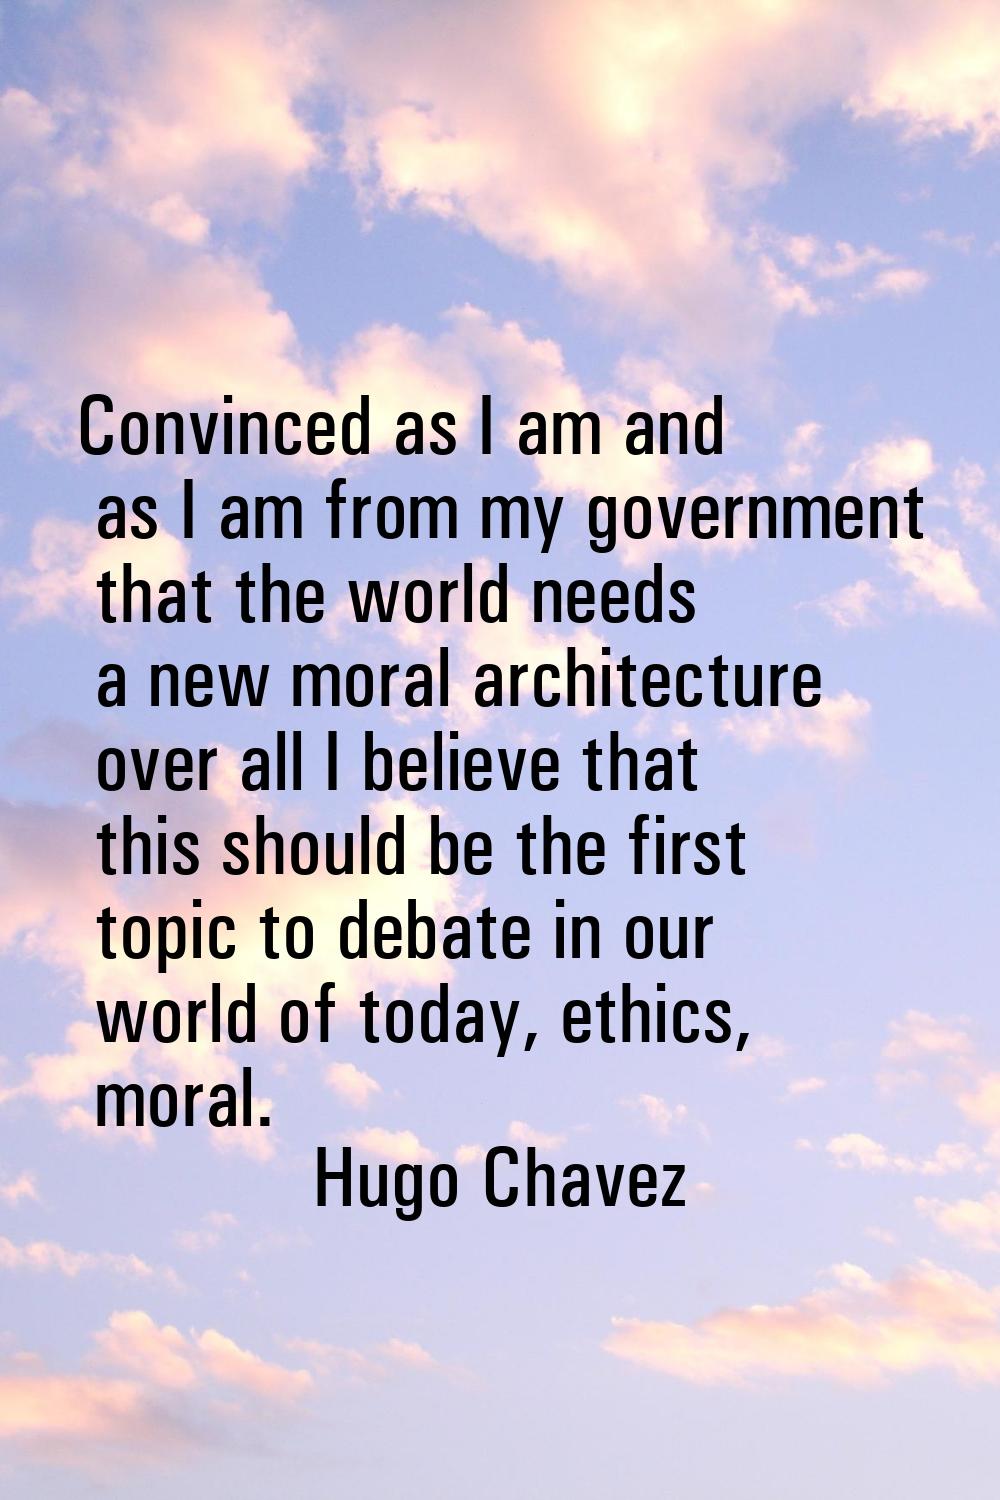 Convinced as I am and as I am from my government that the world needs a new moral architecture over